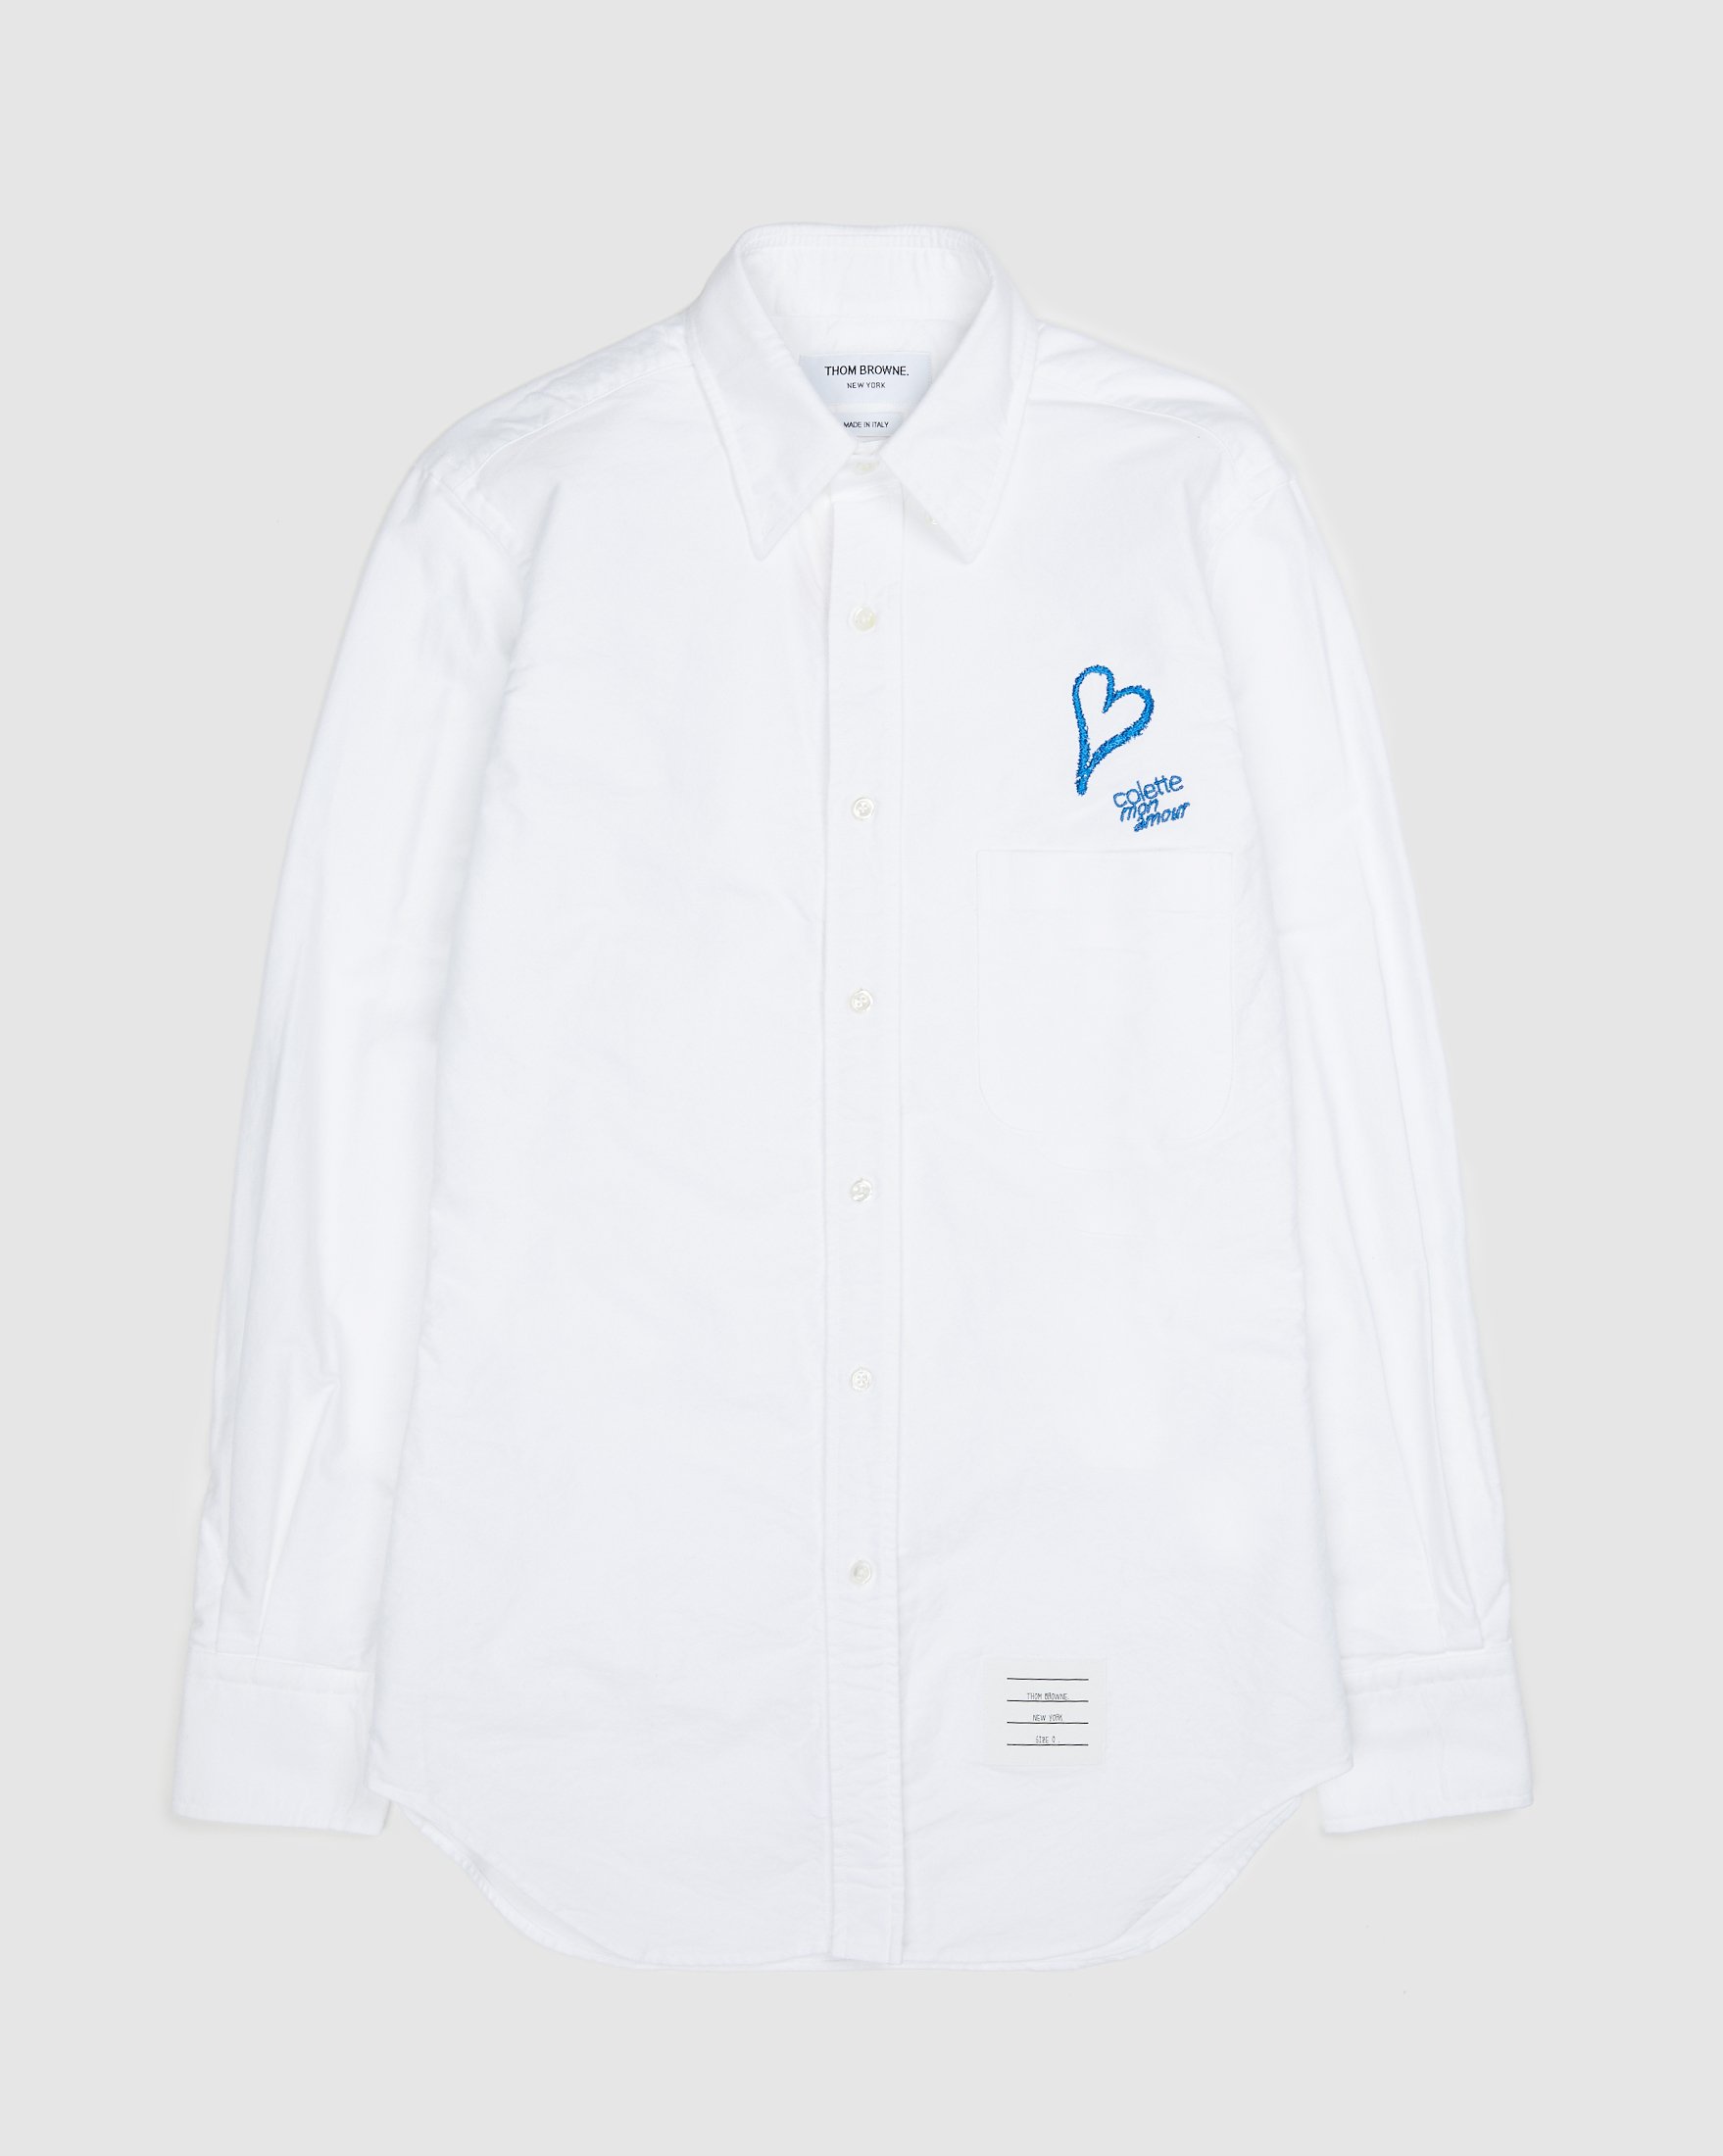 Colette Mon Amour x Thom Browne - White Heart Classic Shirt - Clothing - White - Image 1